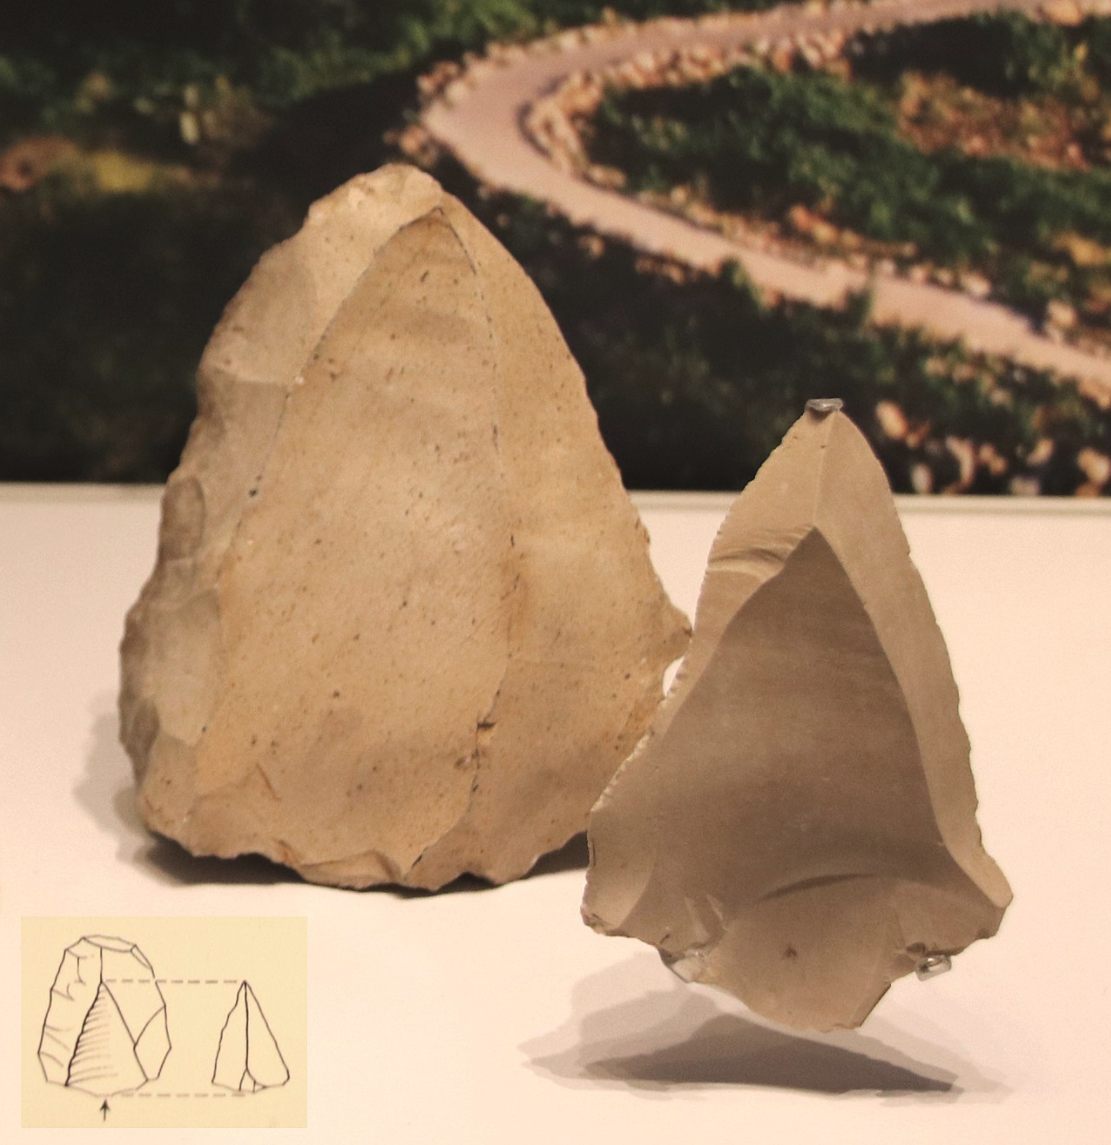 Production of points & spearheads from a flint stone core, Levallois technique, Mousterian culture, Tabun Cave, Israel, 250,000–50,000 BP. Israel Museum.